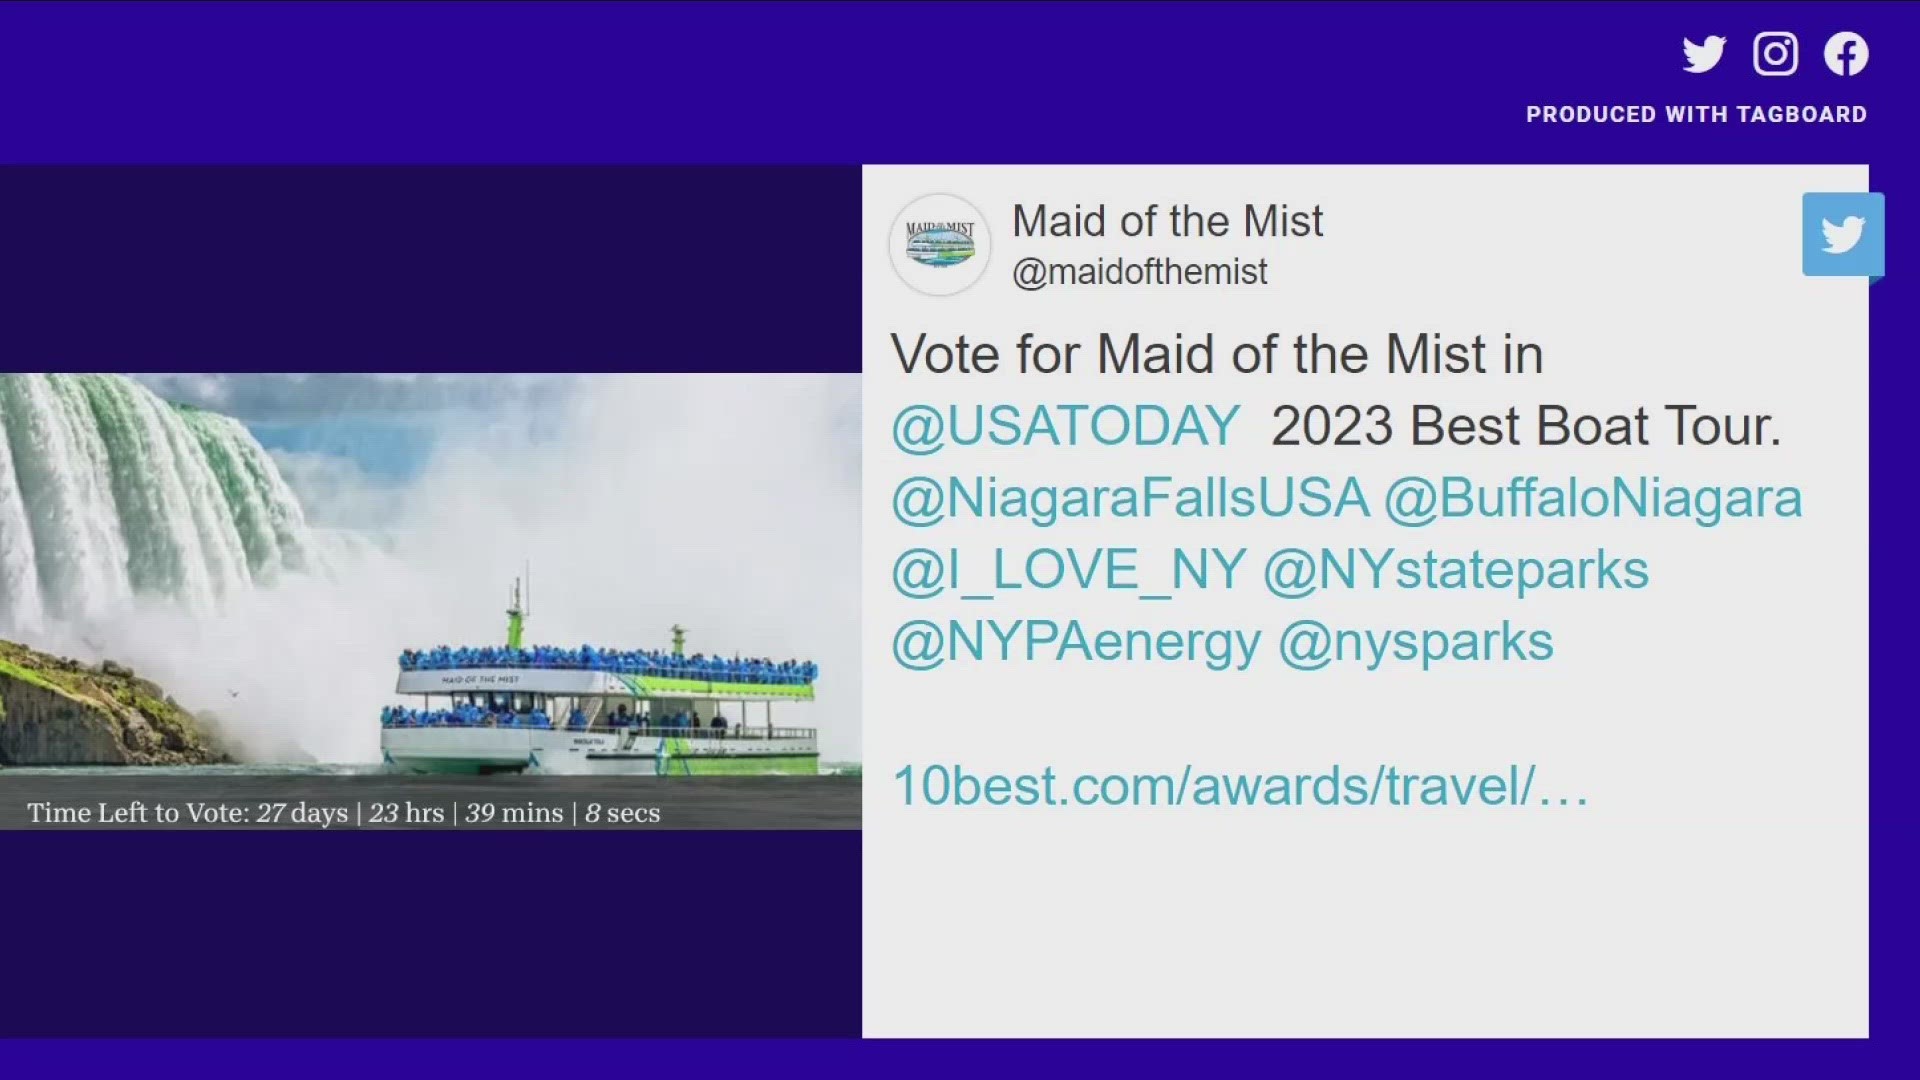 The Maid of the Mist is competing for a national award